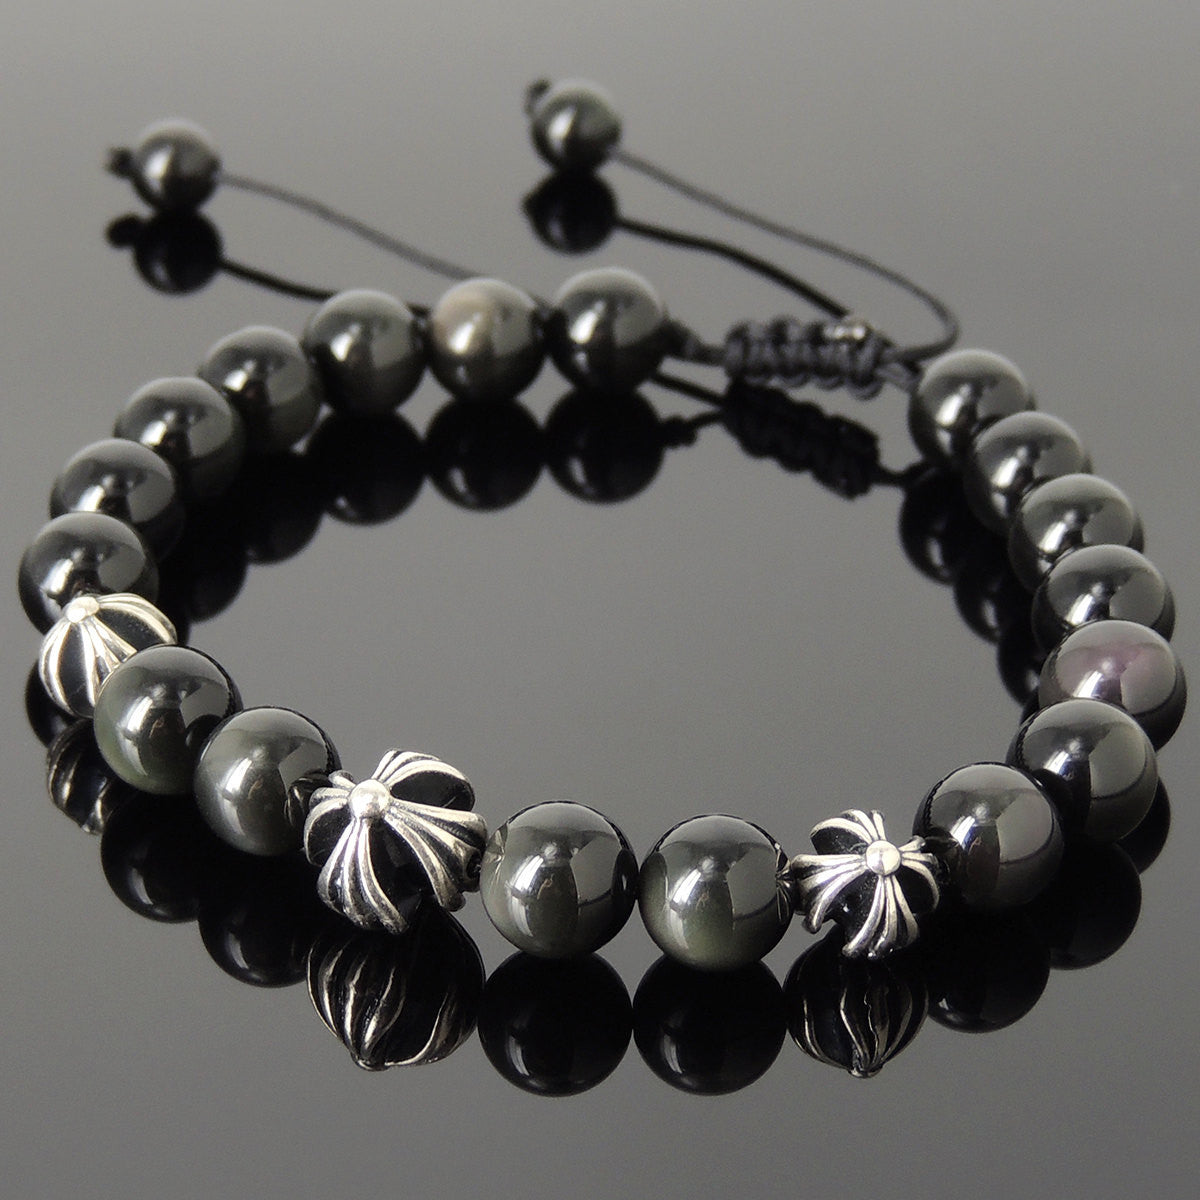 Rainbow Black Obsidian Adjustable Braided Bracelet with S925 Sterling Silver Holy Trinity Cross Beads - Handmade by Gem & Silver BR837